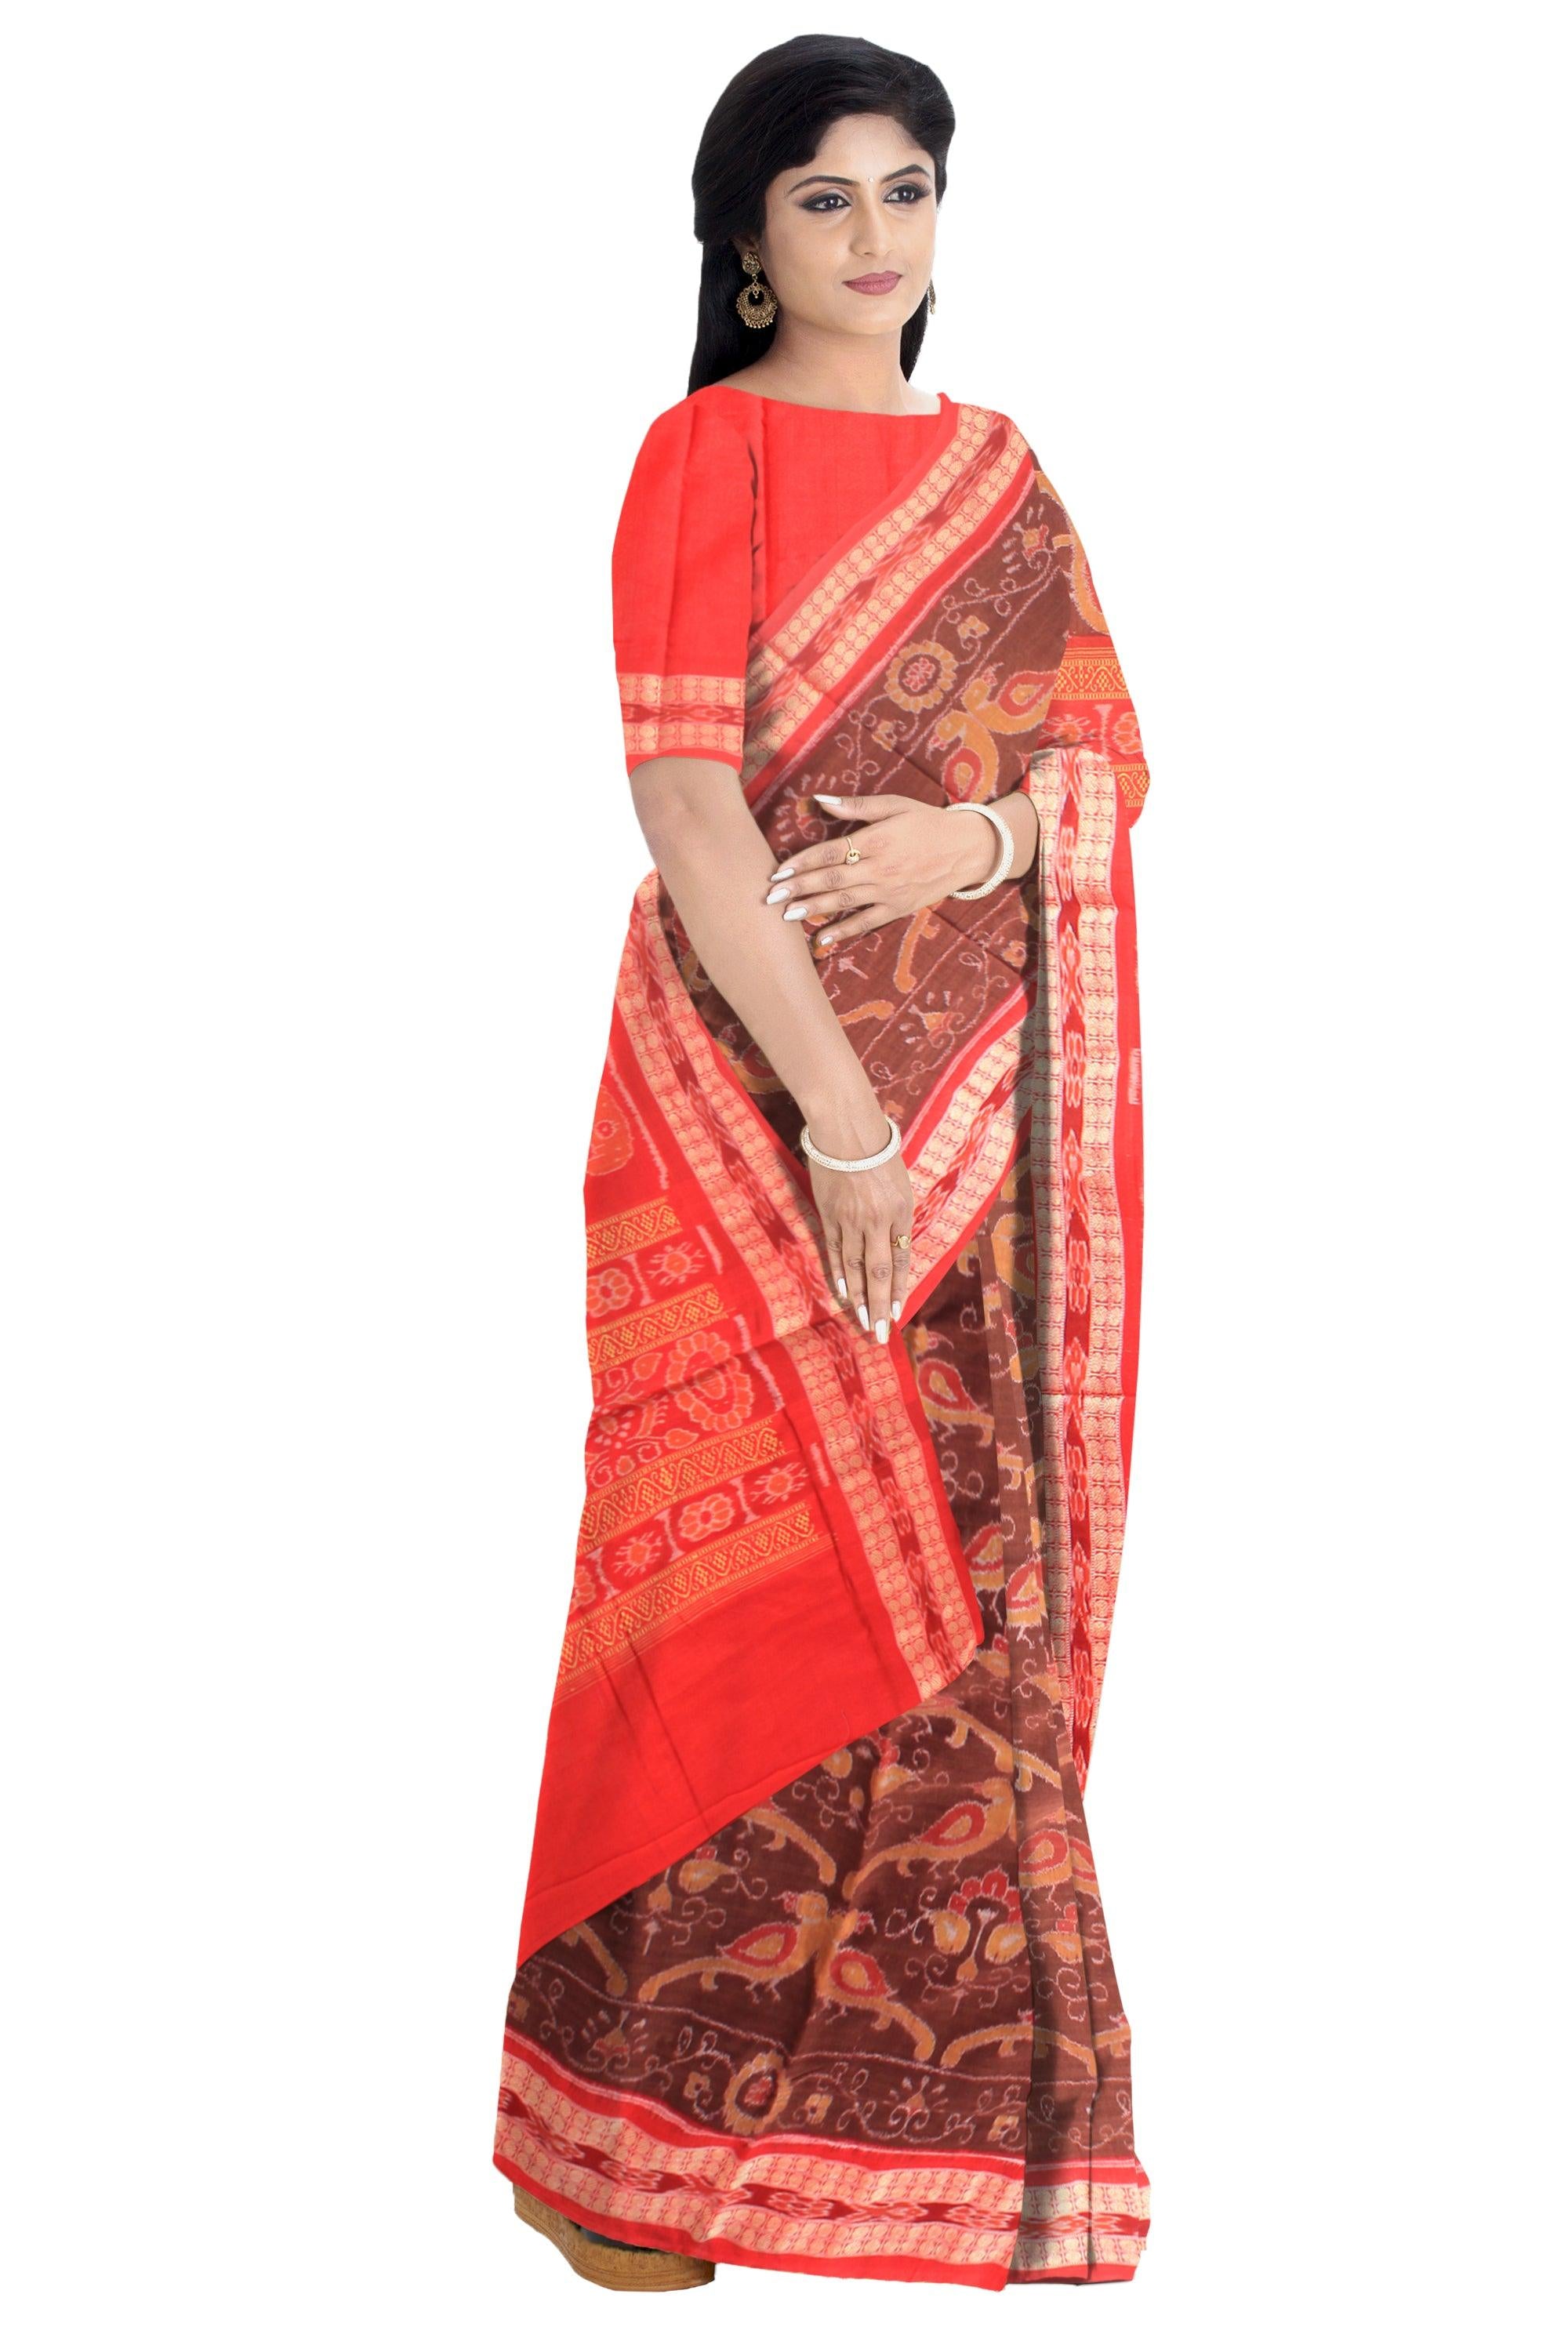 Authentic Cotton  saree in Brown and Red color, peacock design   With blouse piece. - Koshali Arts & Crafts Enterprise